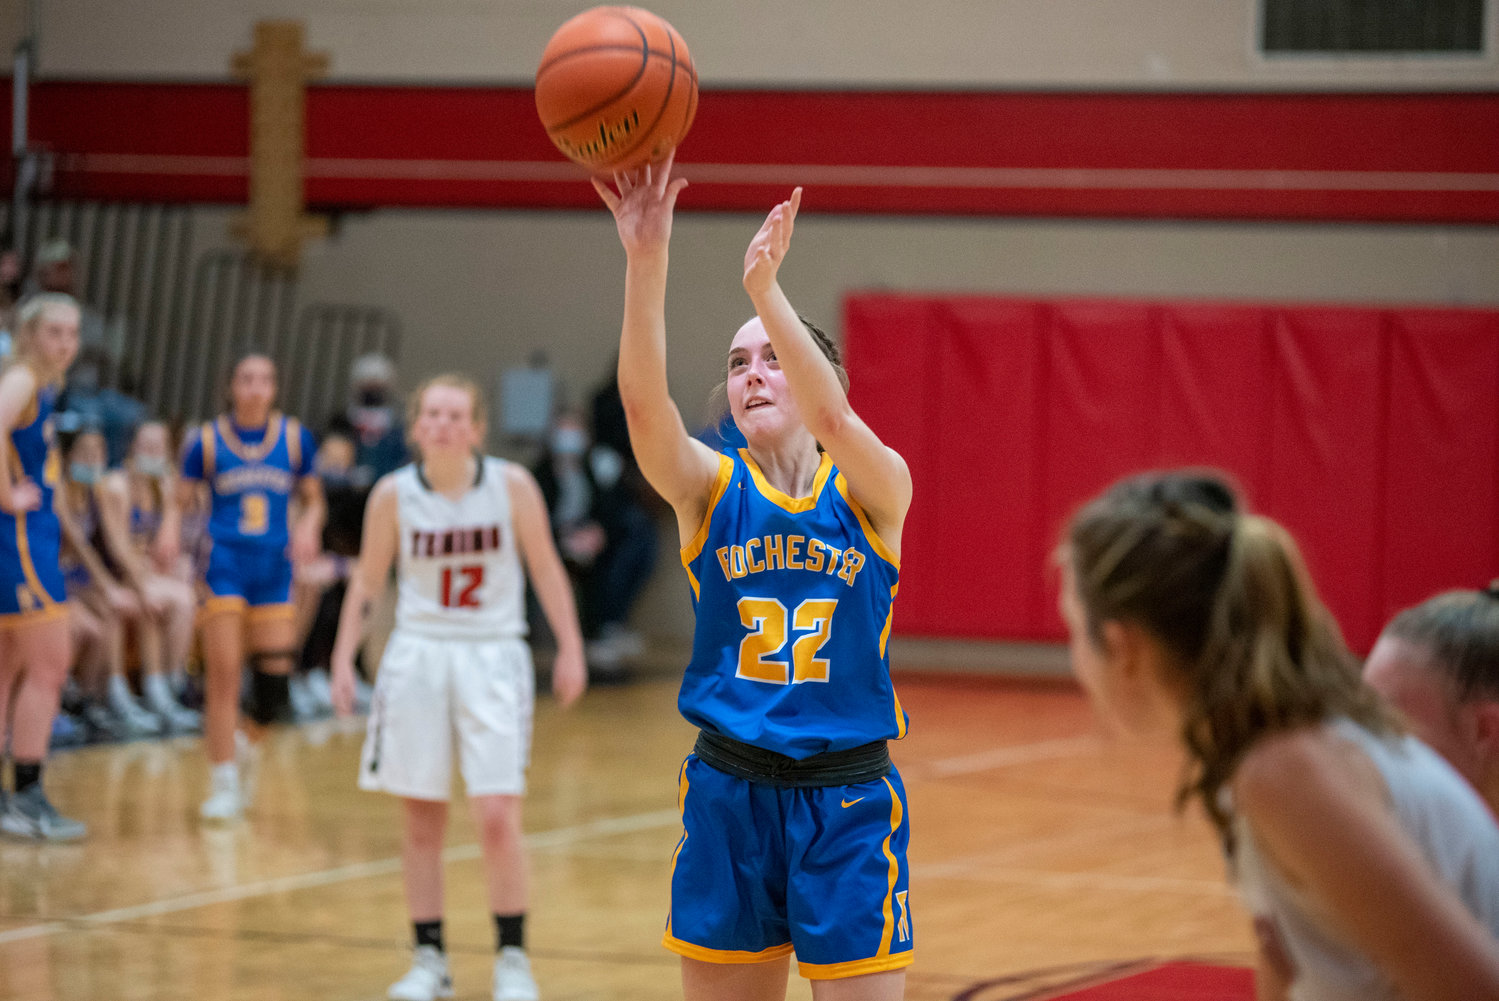 Rochester's Lauren Rotter (22) shoots a free throw against Tenino on Dec. 2.